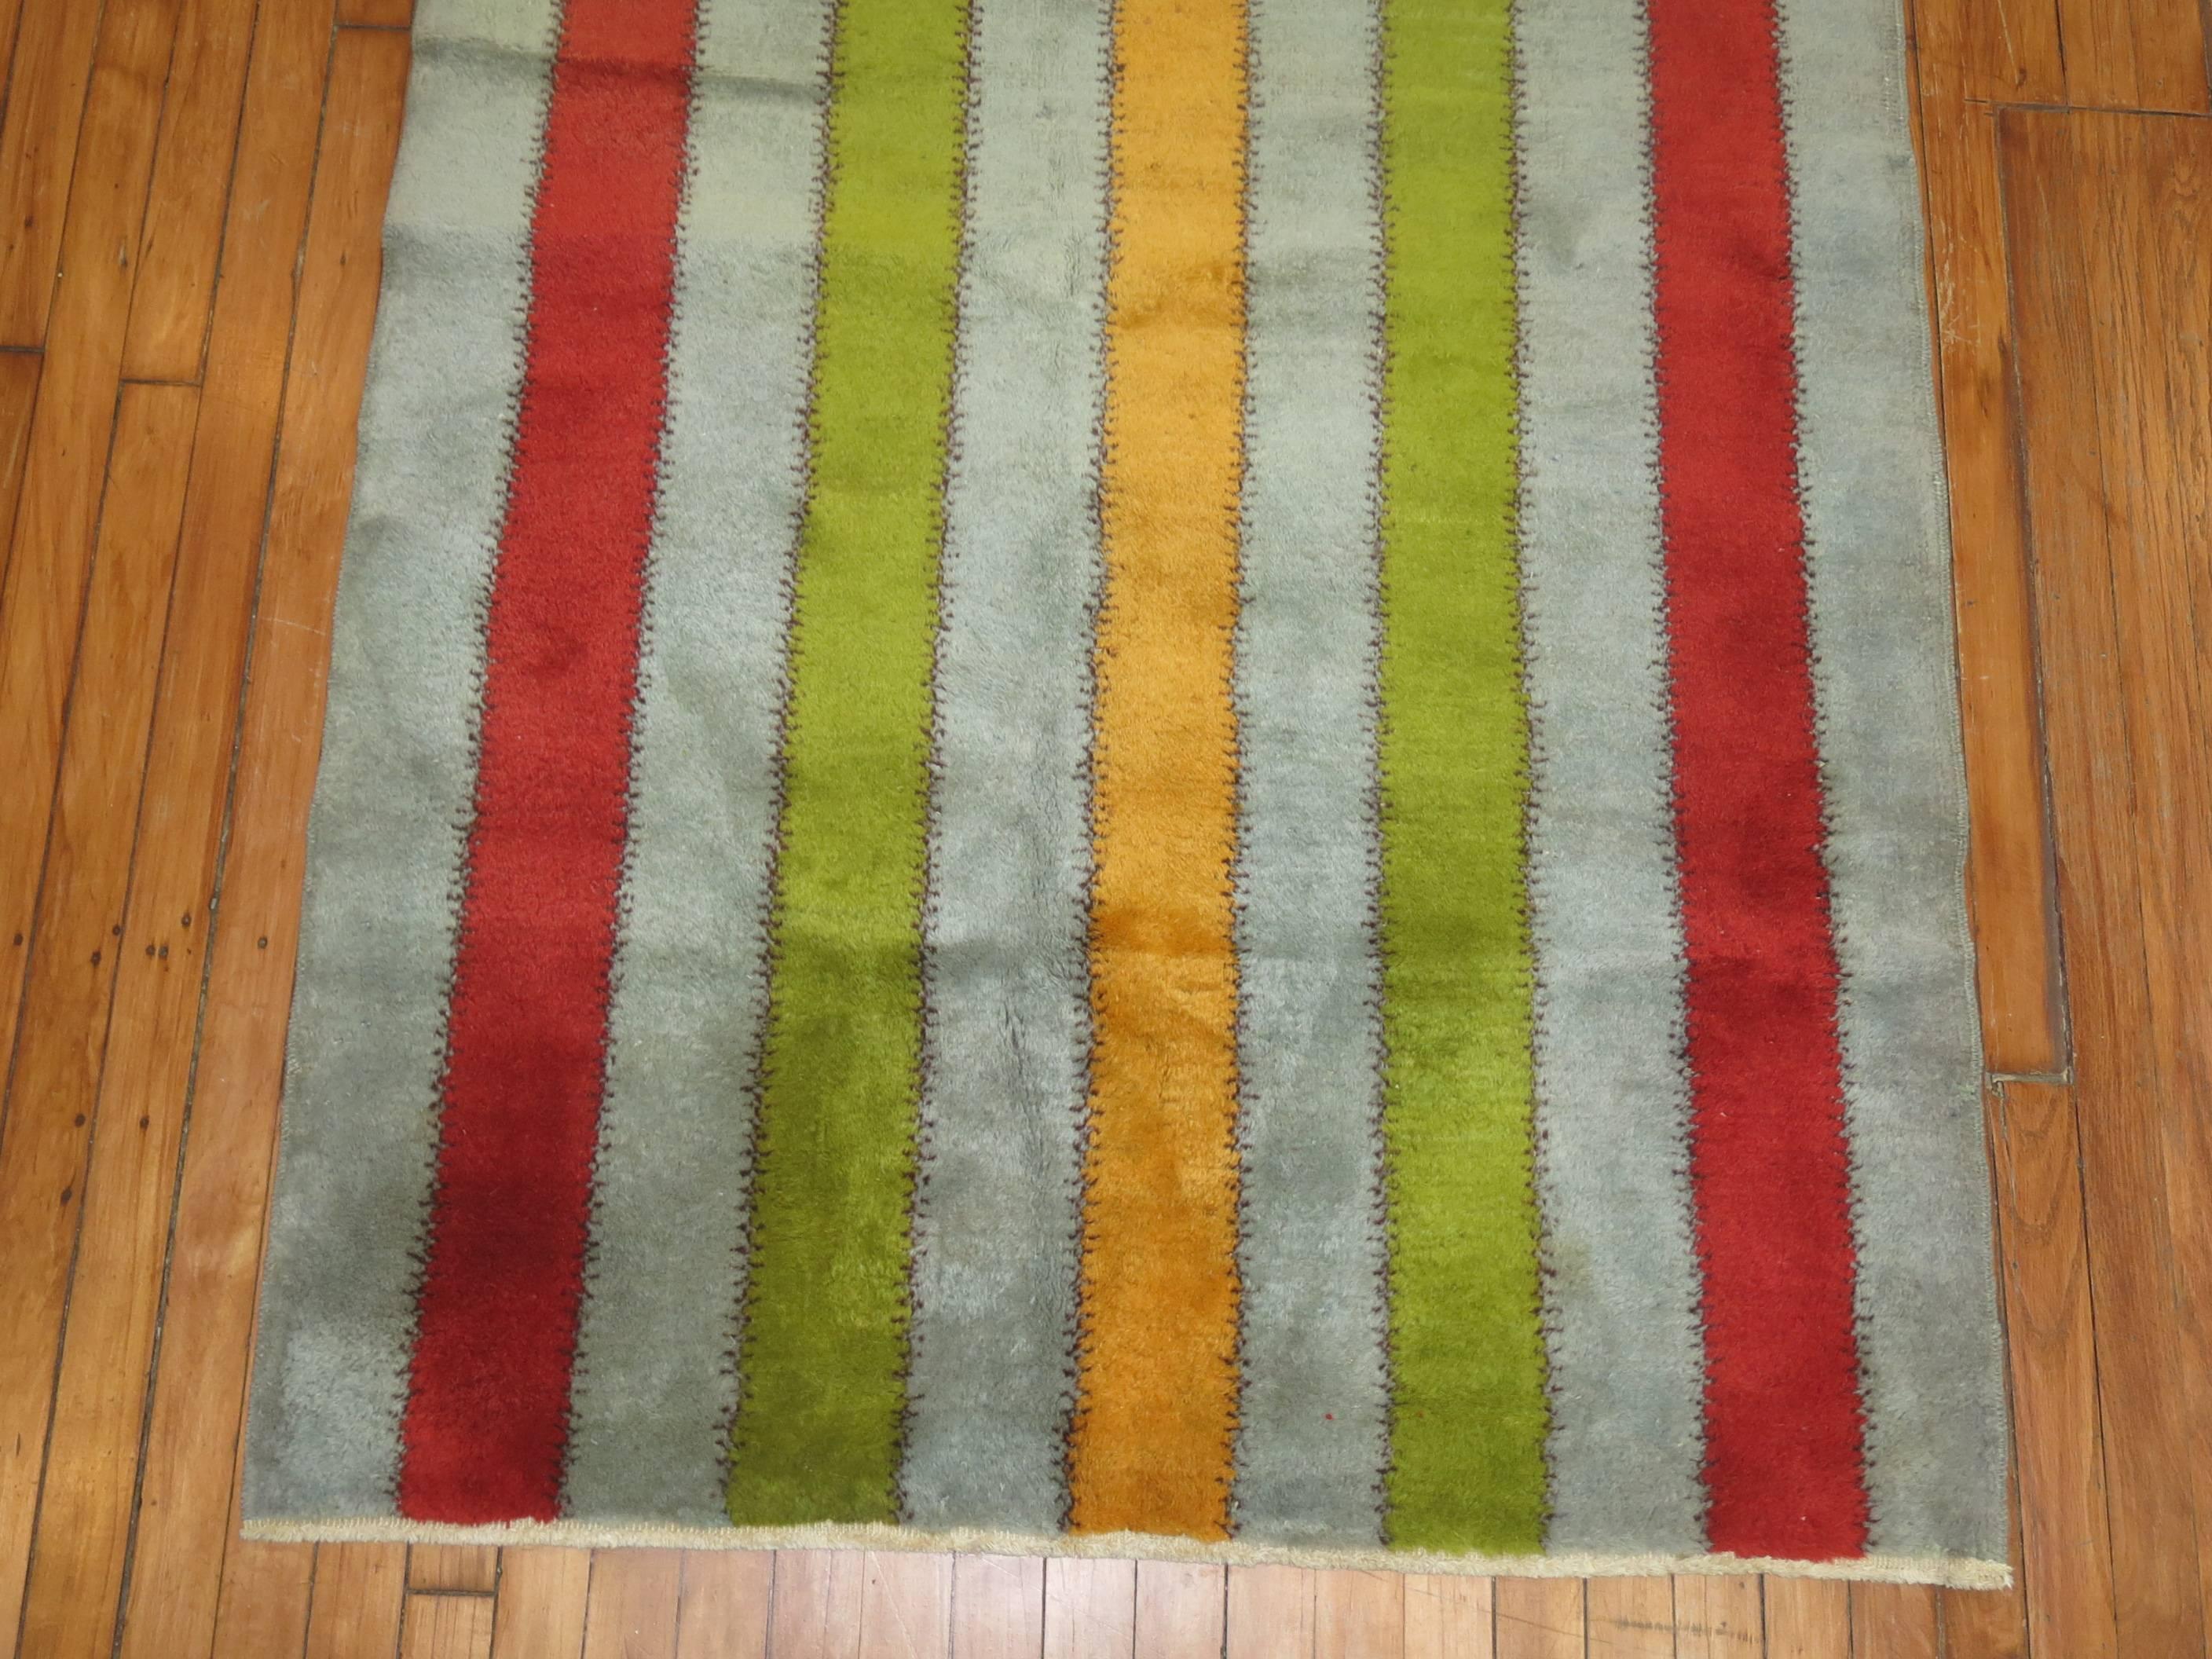 Unusual vintage Turkish rug with a colorful vertical striped motif on a blue field.

Measures: 3'9'' x 6'10''.